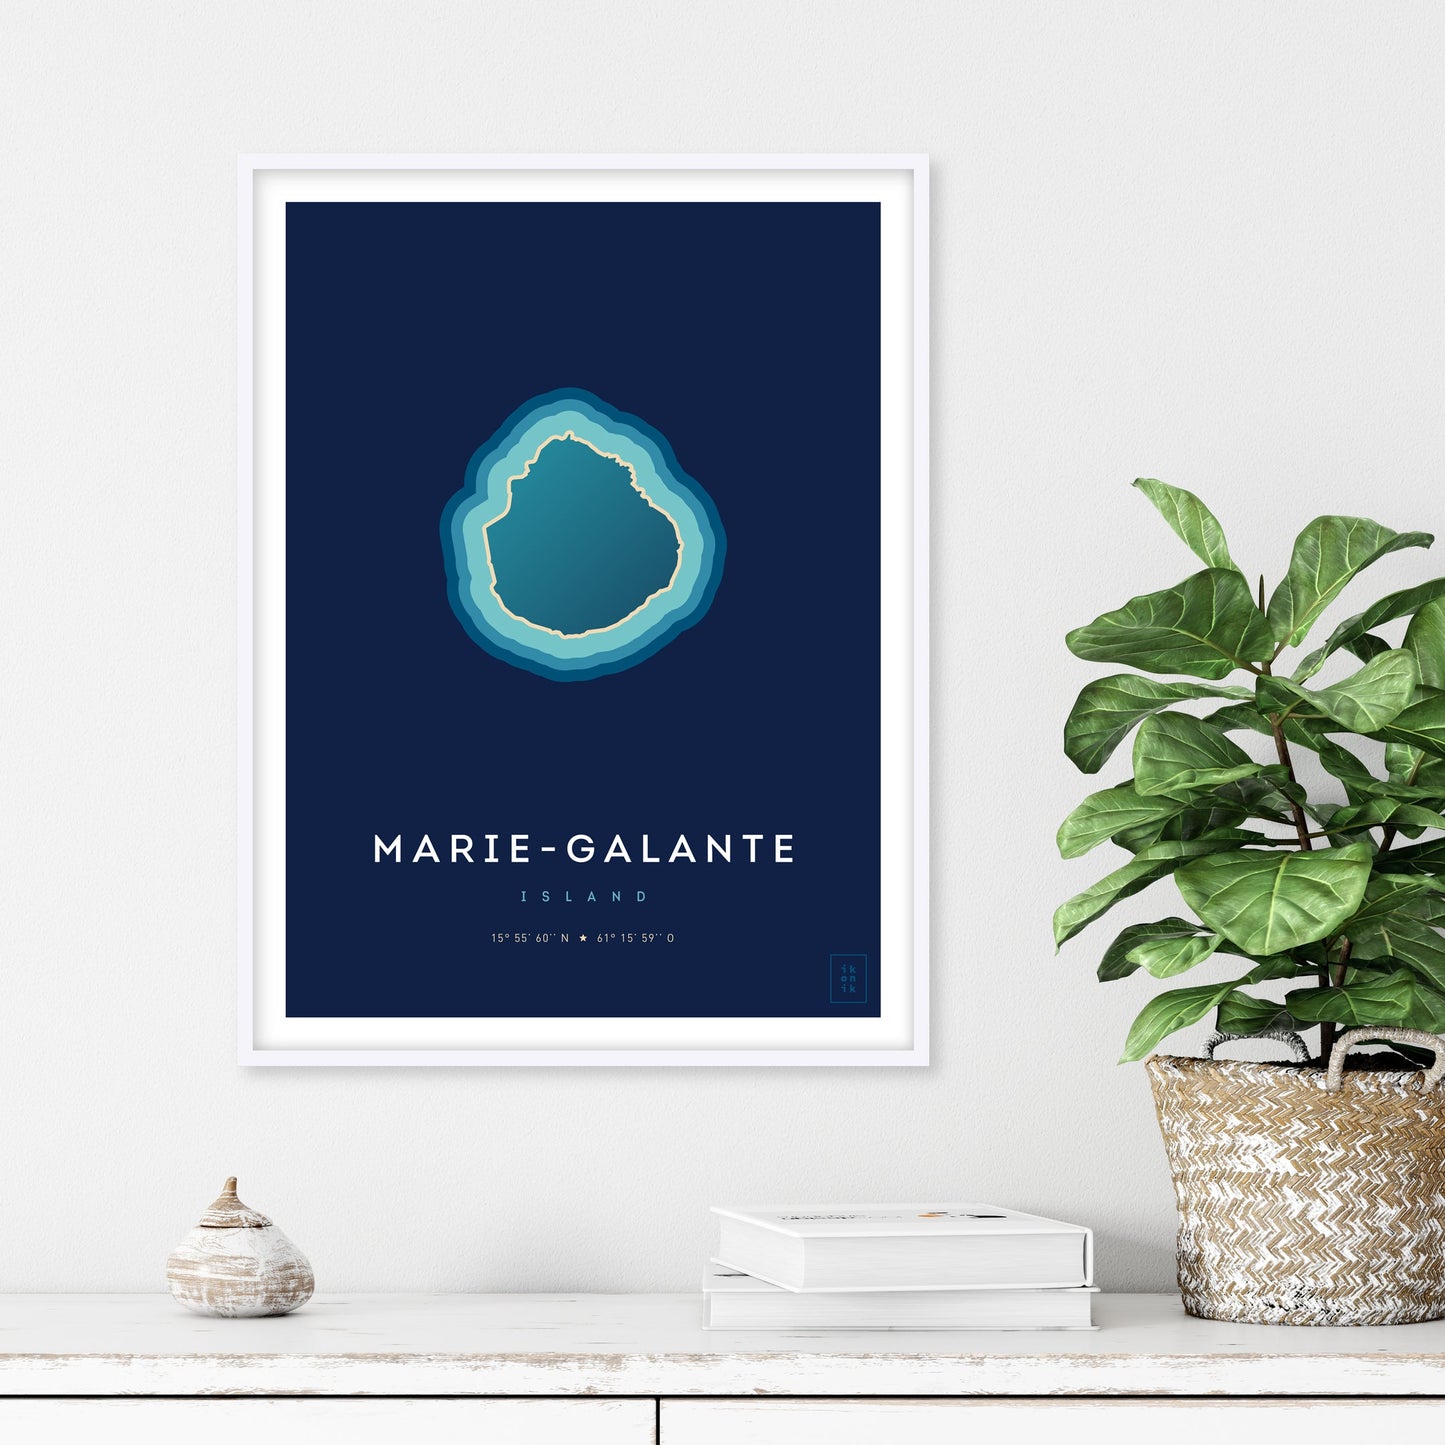 Poster of the island of Marie-Galante